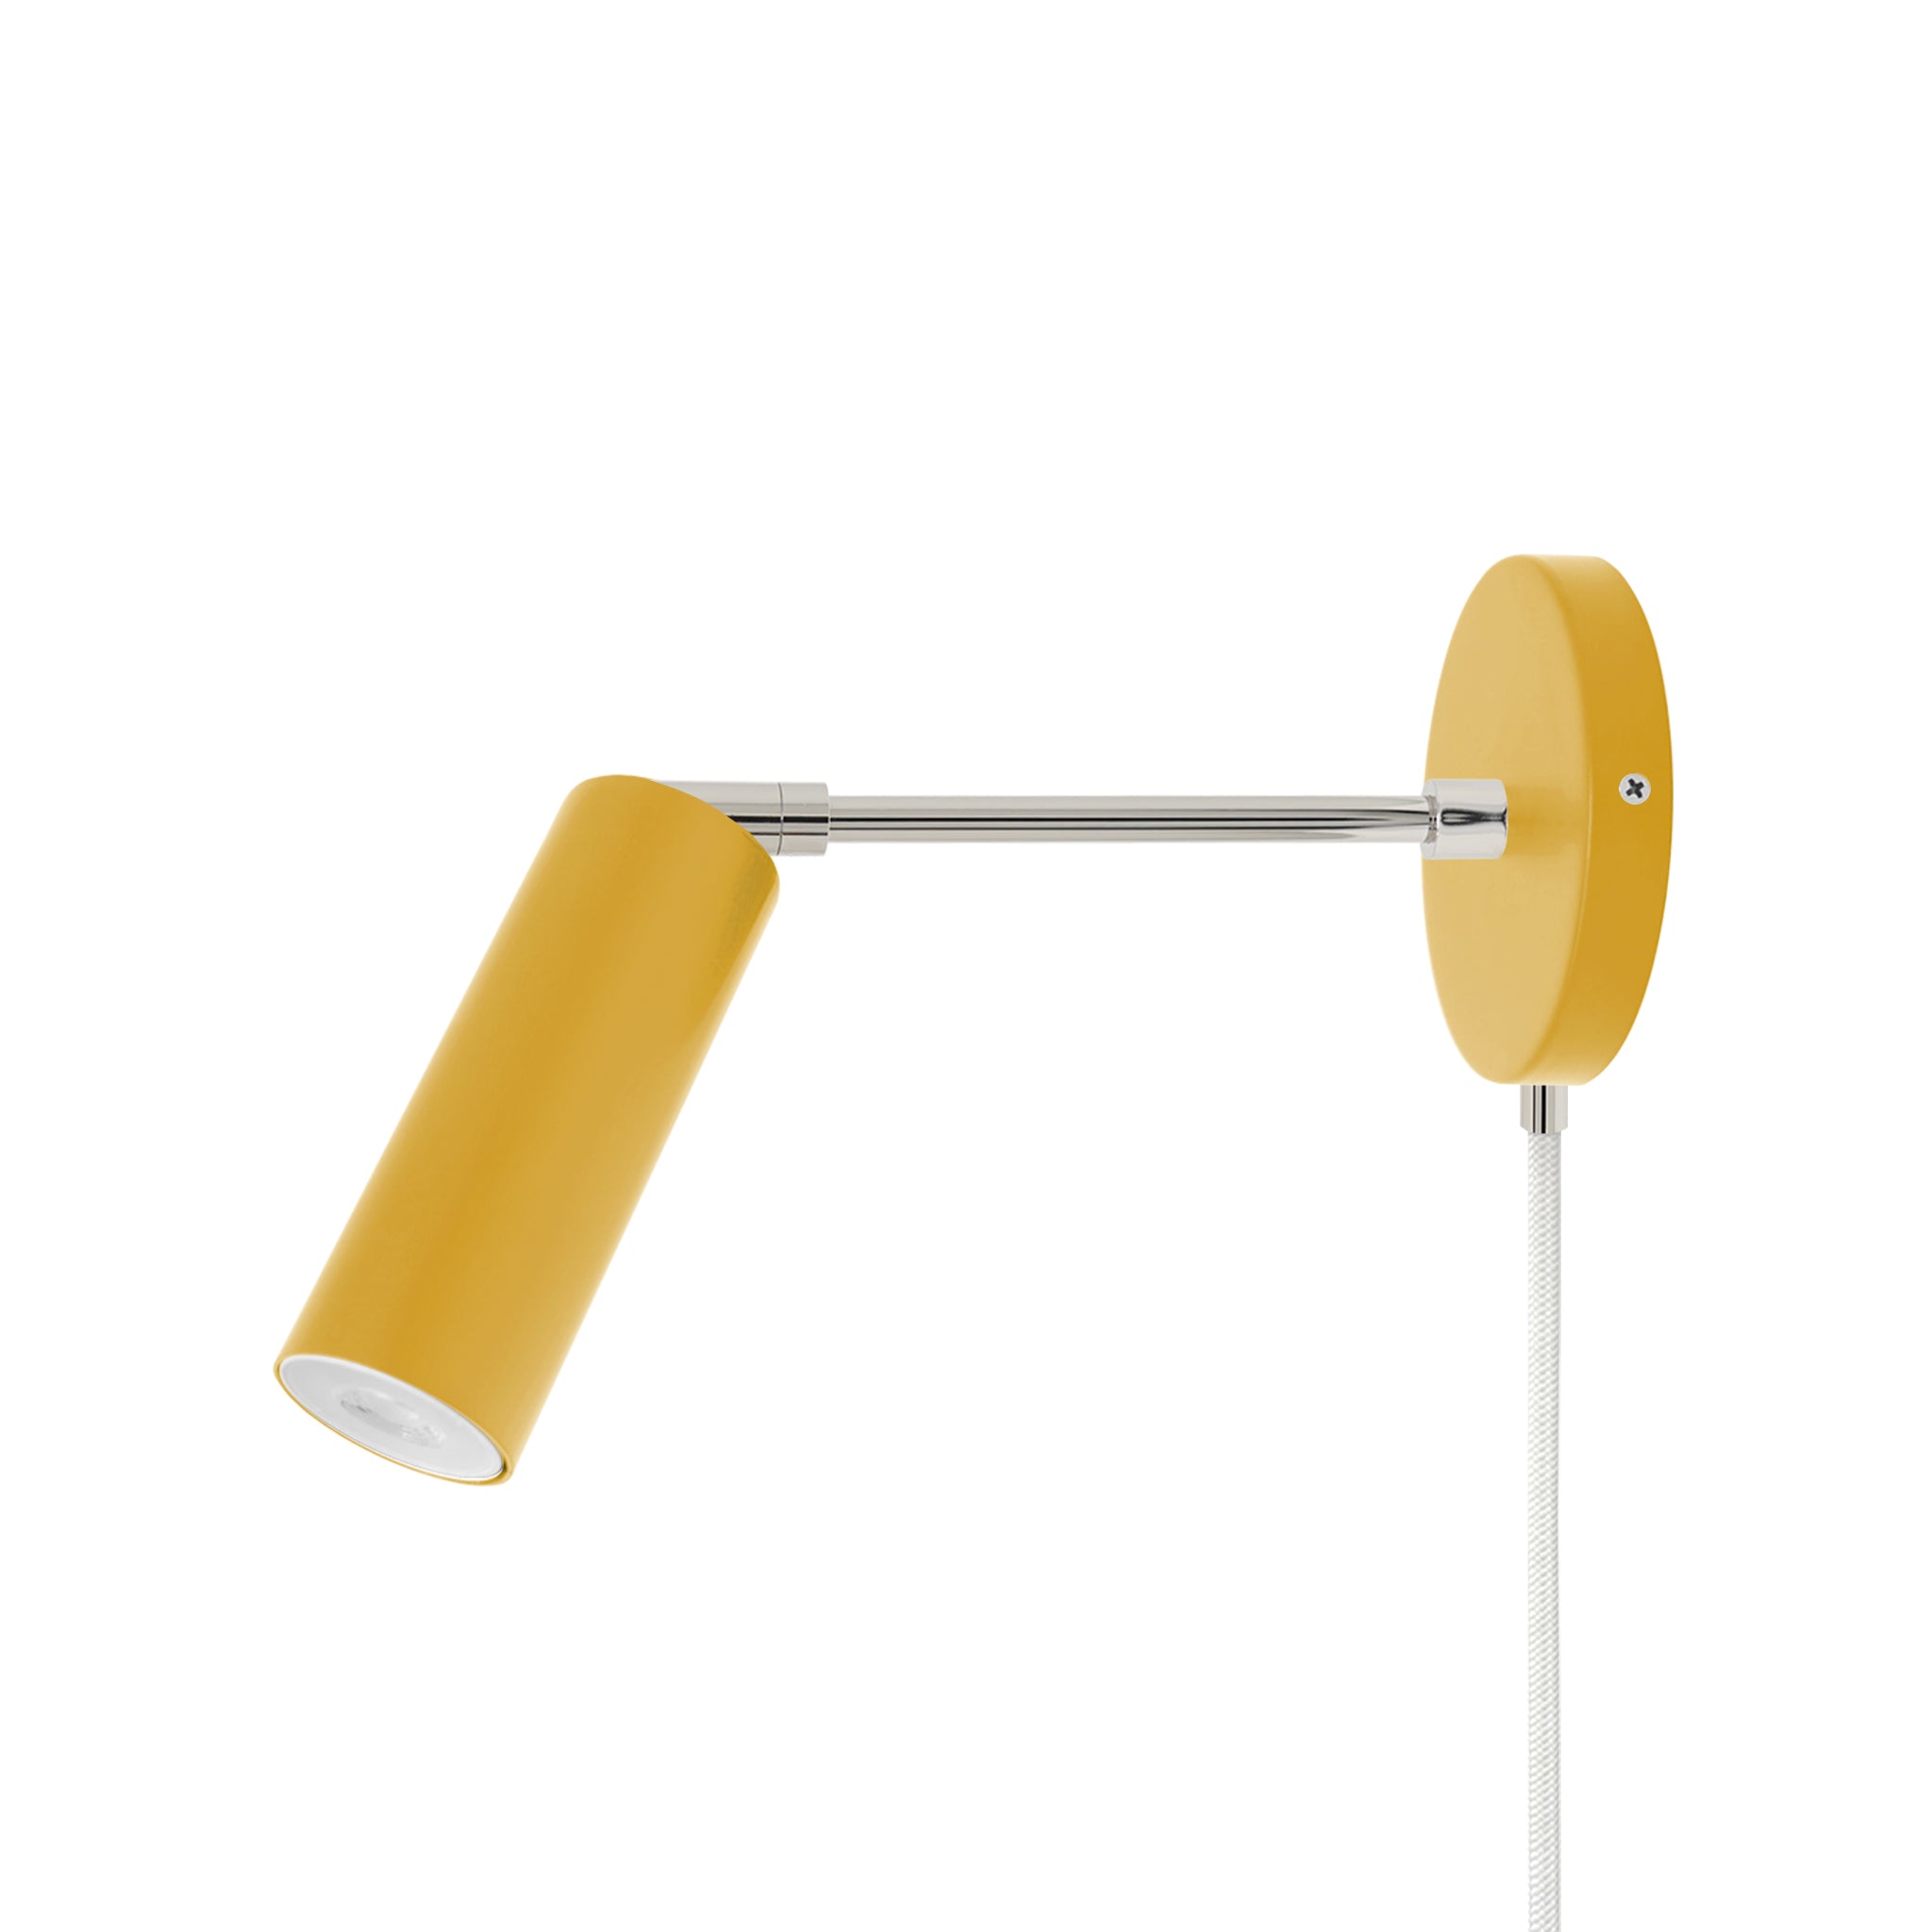 Nickel and ochre color Reader plug-in sconce 6" arm Dutton Brown lighting